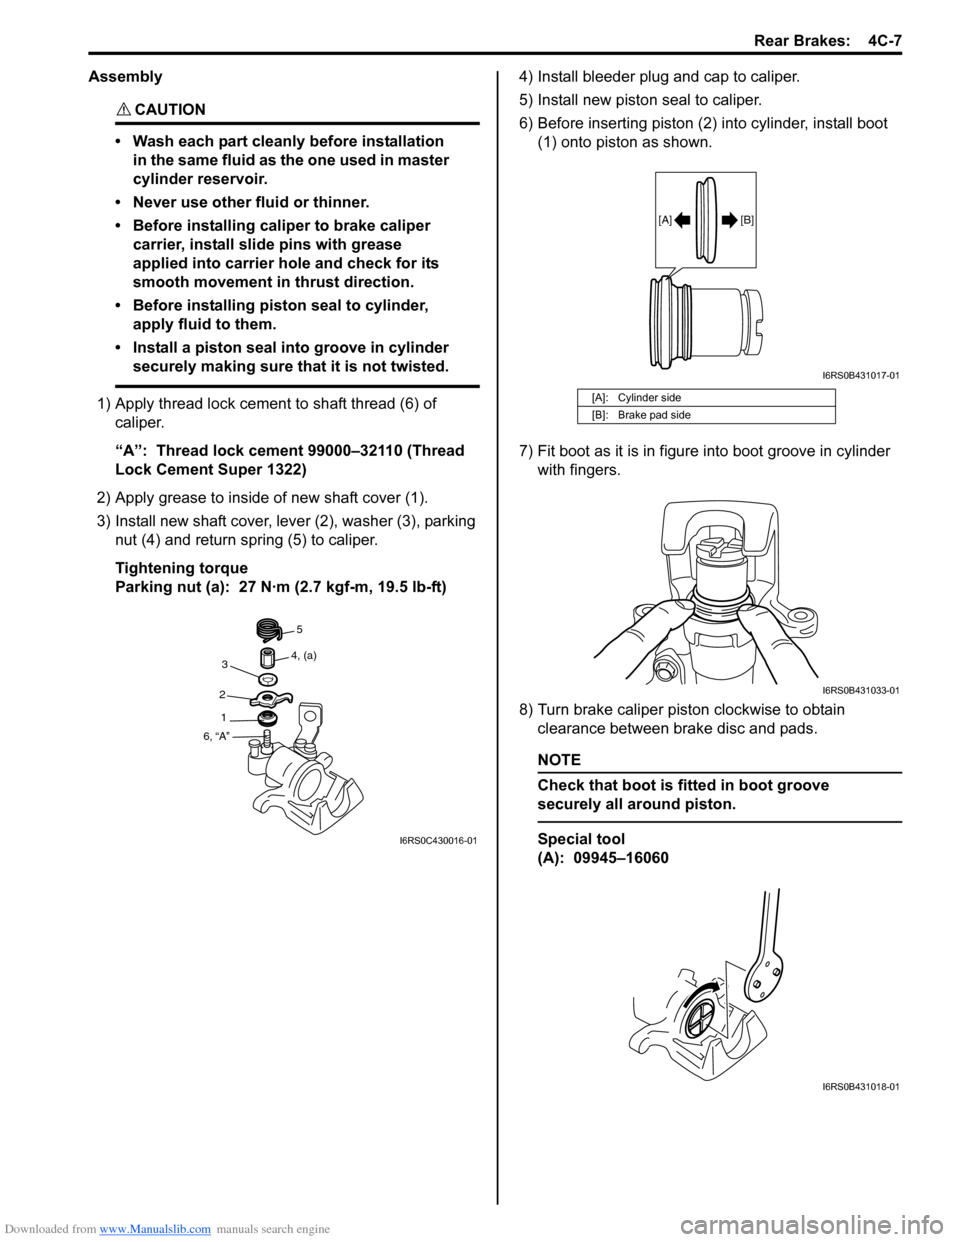 SUZUKI SWIFT 2008 2.G Service Owners Guide Downloaded from www.Manualslib.com manuals search engine Rear Brakes:  4C-7
Assembly
CAUTION! 
• Wash each part cleanly before installation in the same fluid as the one used in master 
cylinder rese